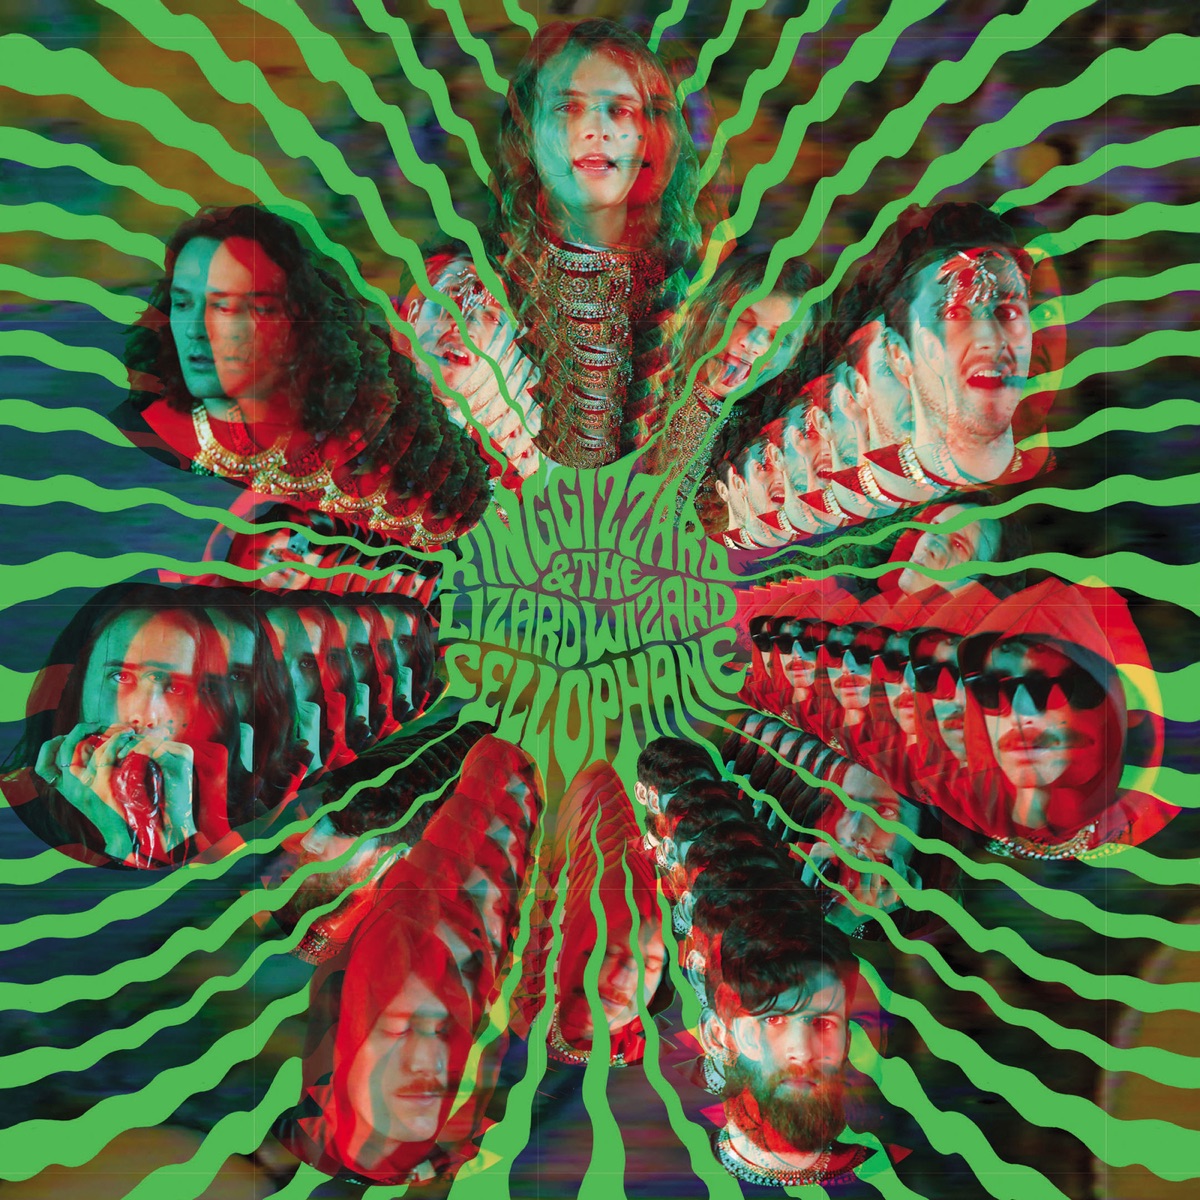 Cellophane / The Wholly Ghost, by King Gizzard & the Lizard Wizard ...